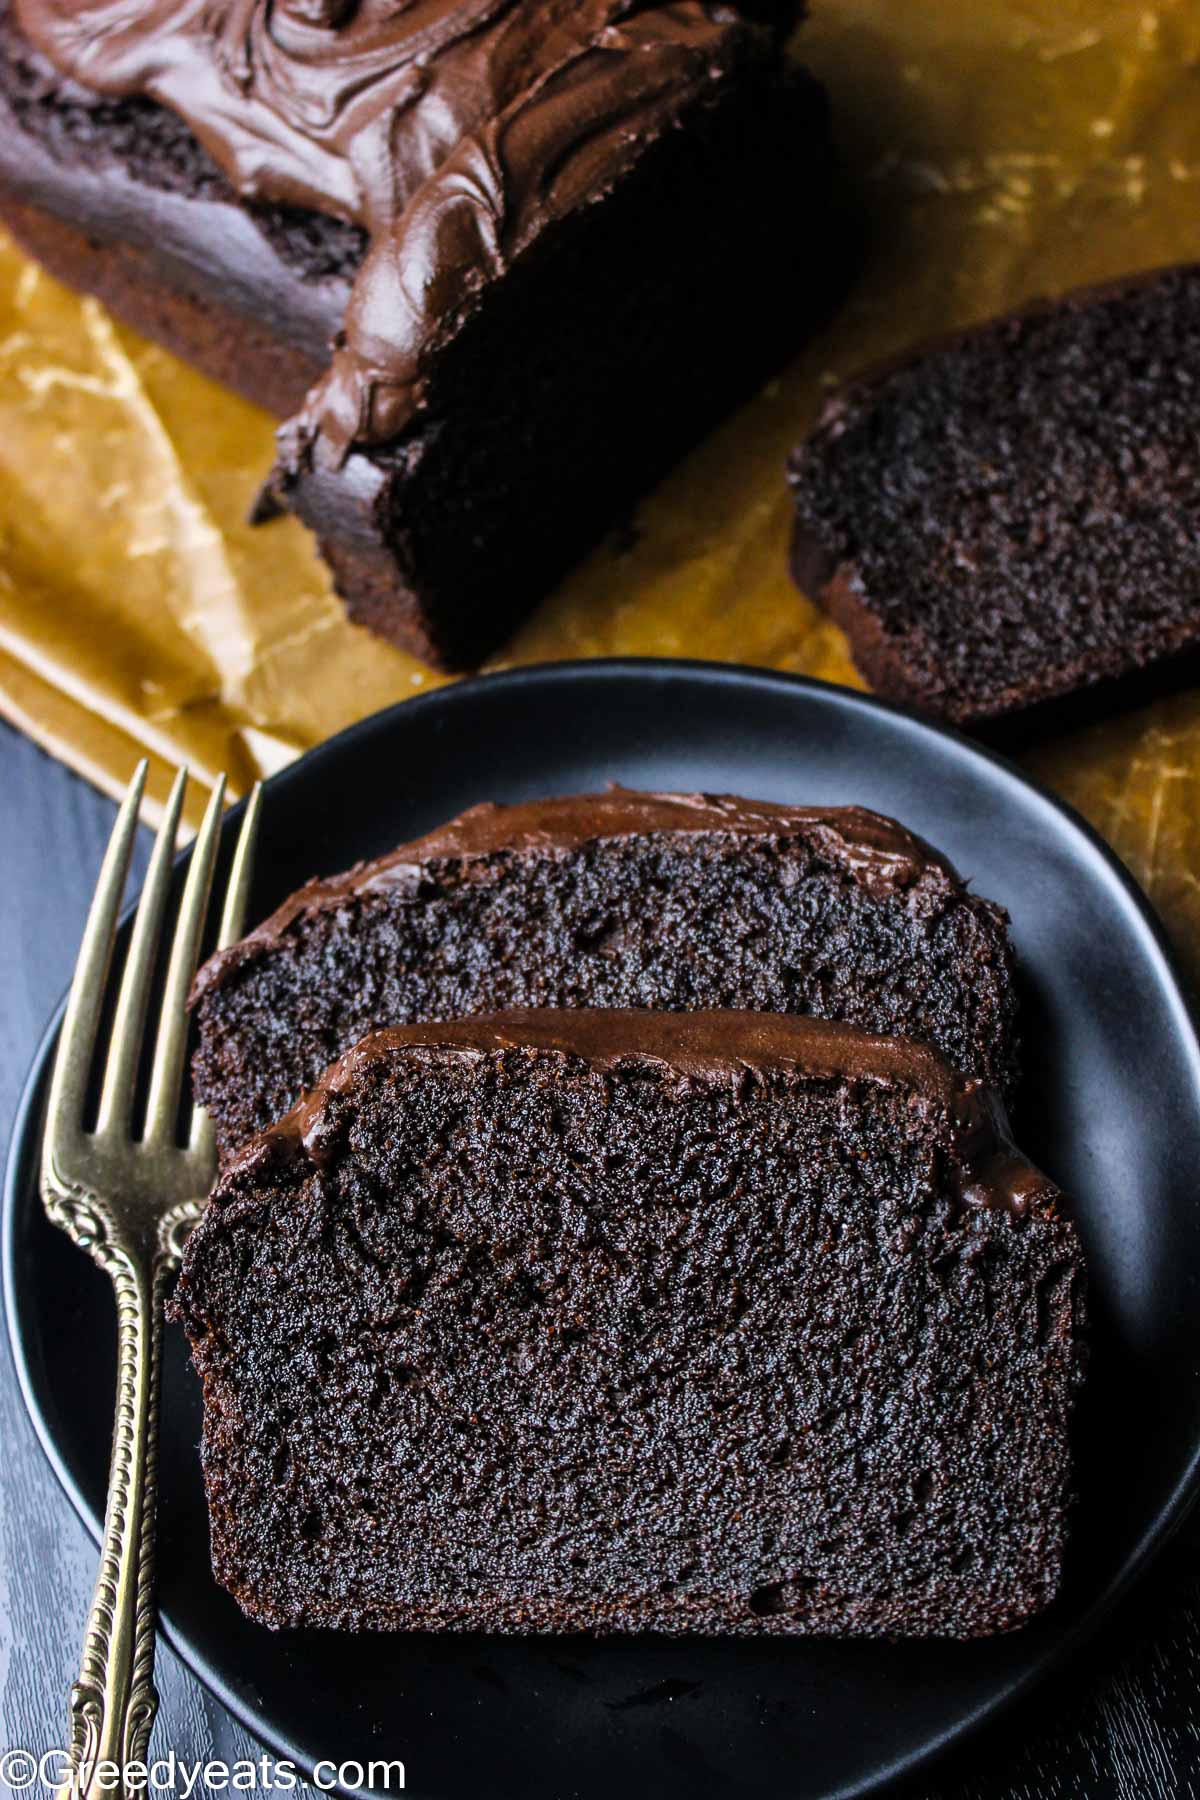 Riich and decadent Chocolate Banana Bread slices topped with silky chocolate frosting.